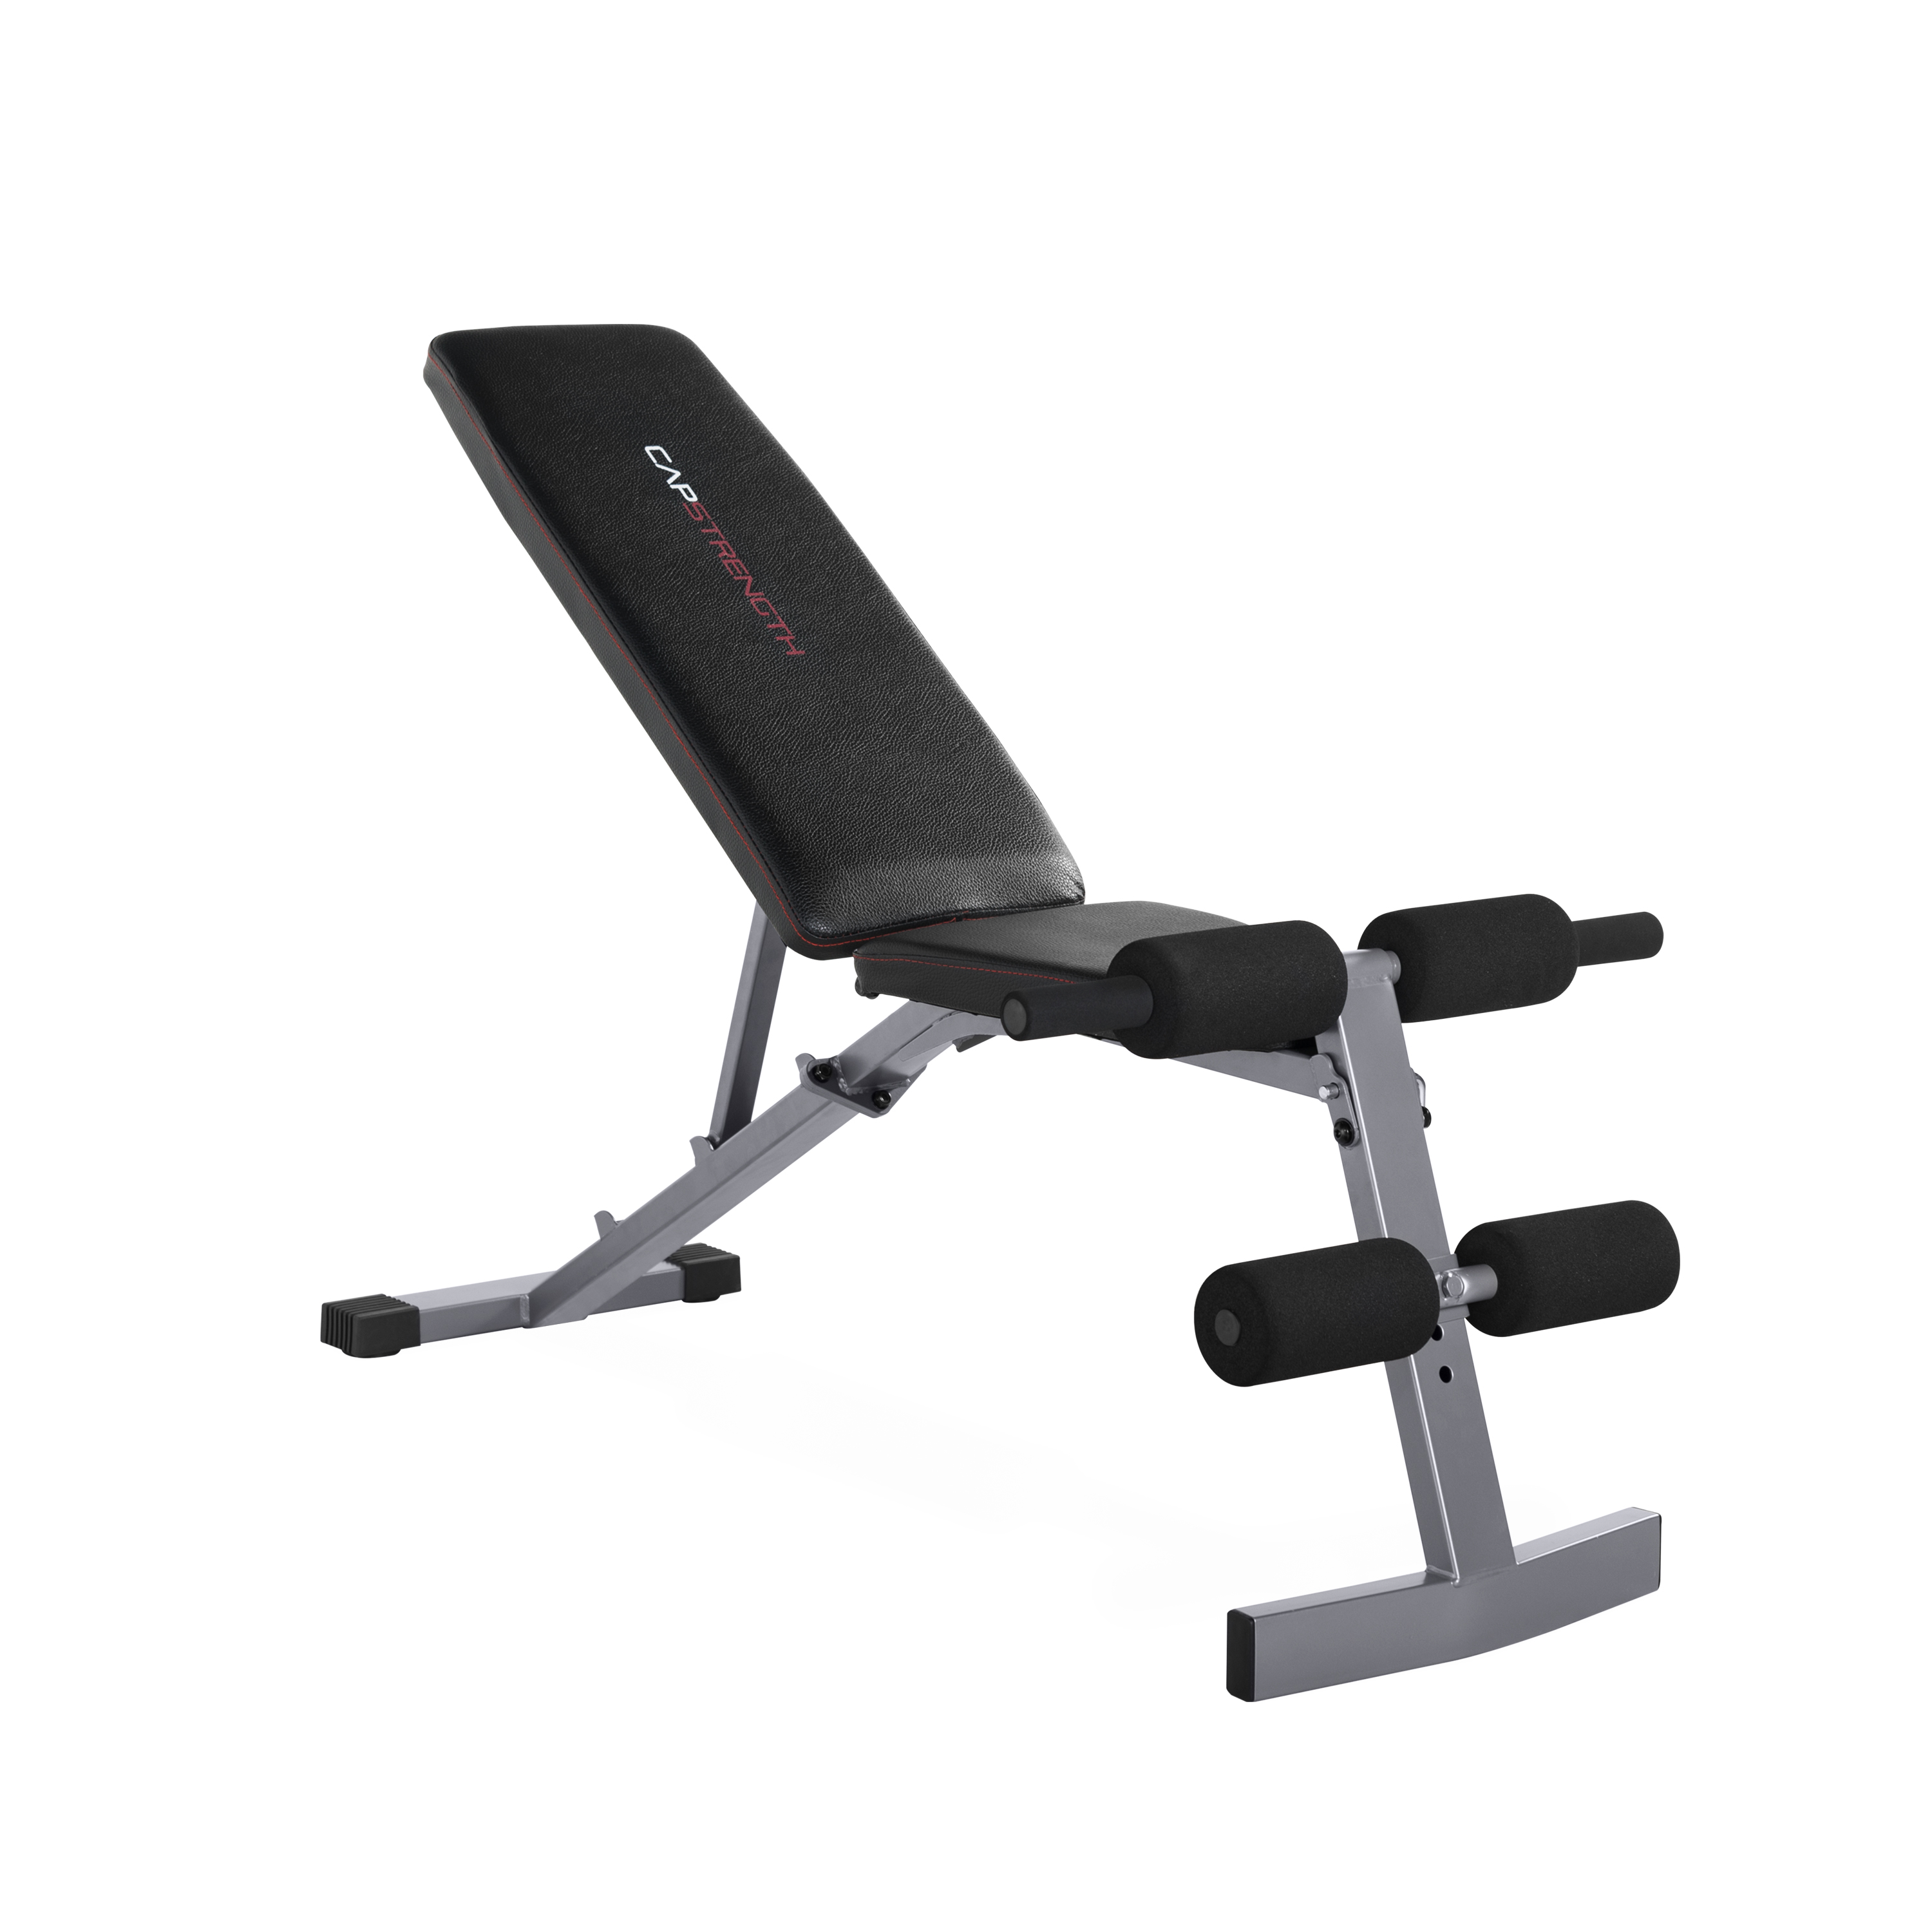 CAP Strength Adjustable FID Workout Bench (600 lb Weight Capacity), Black & Gray - image 1 of 10